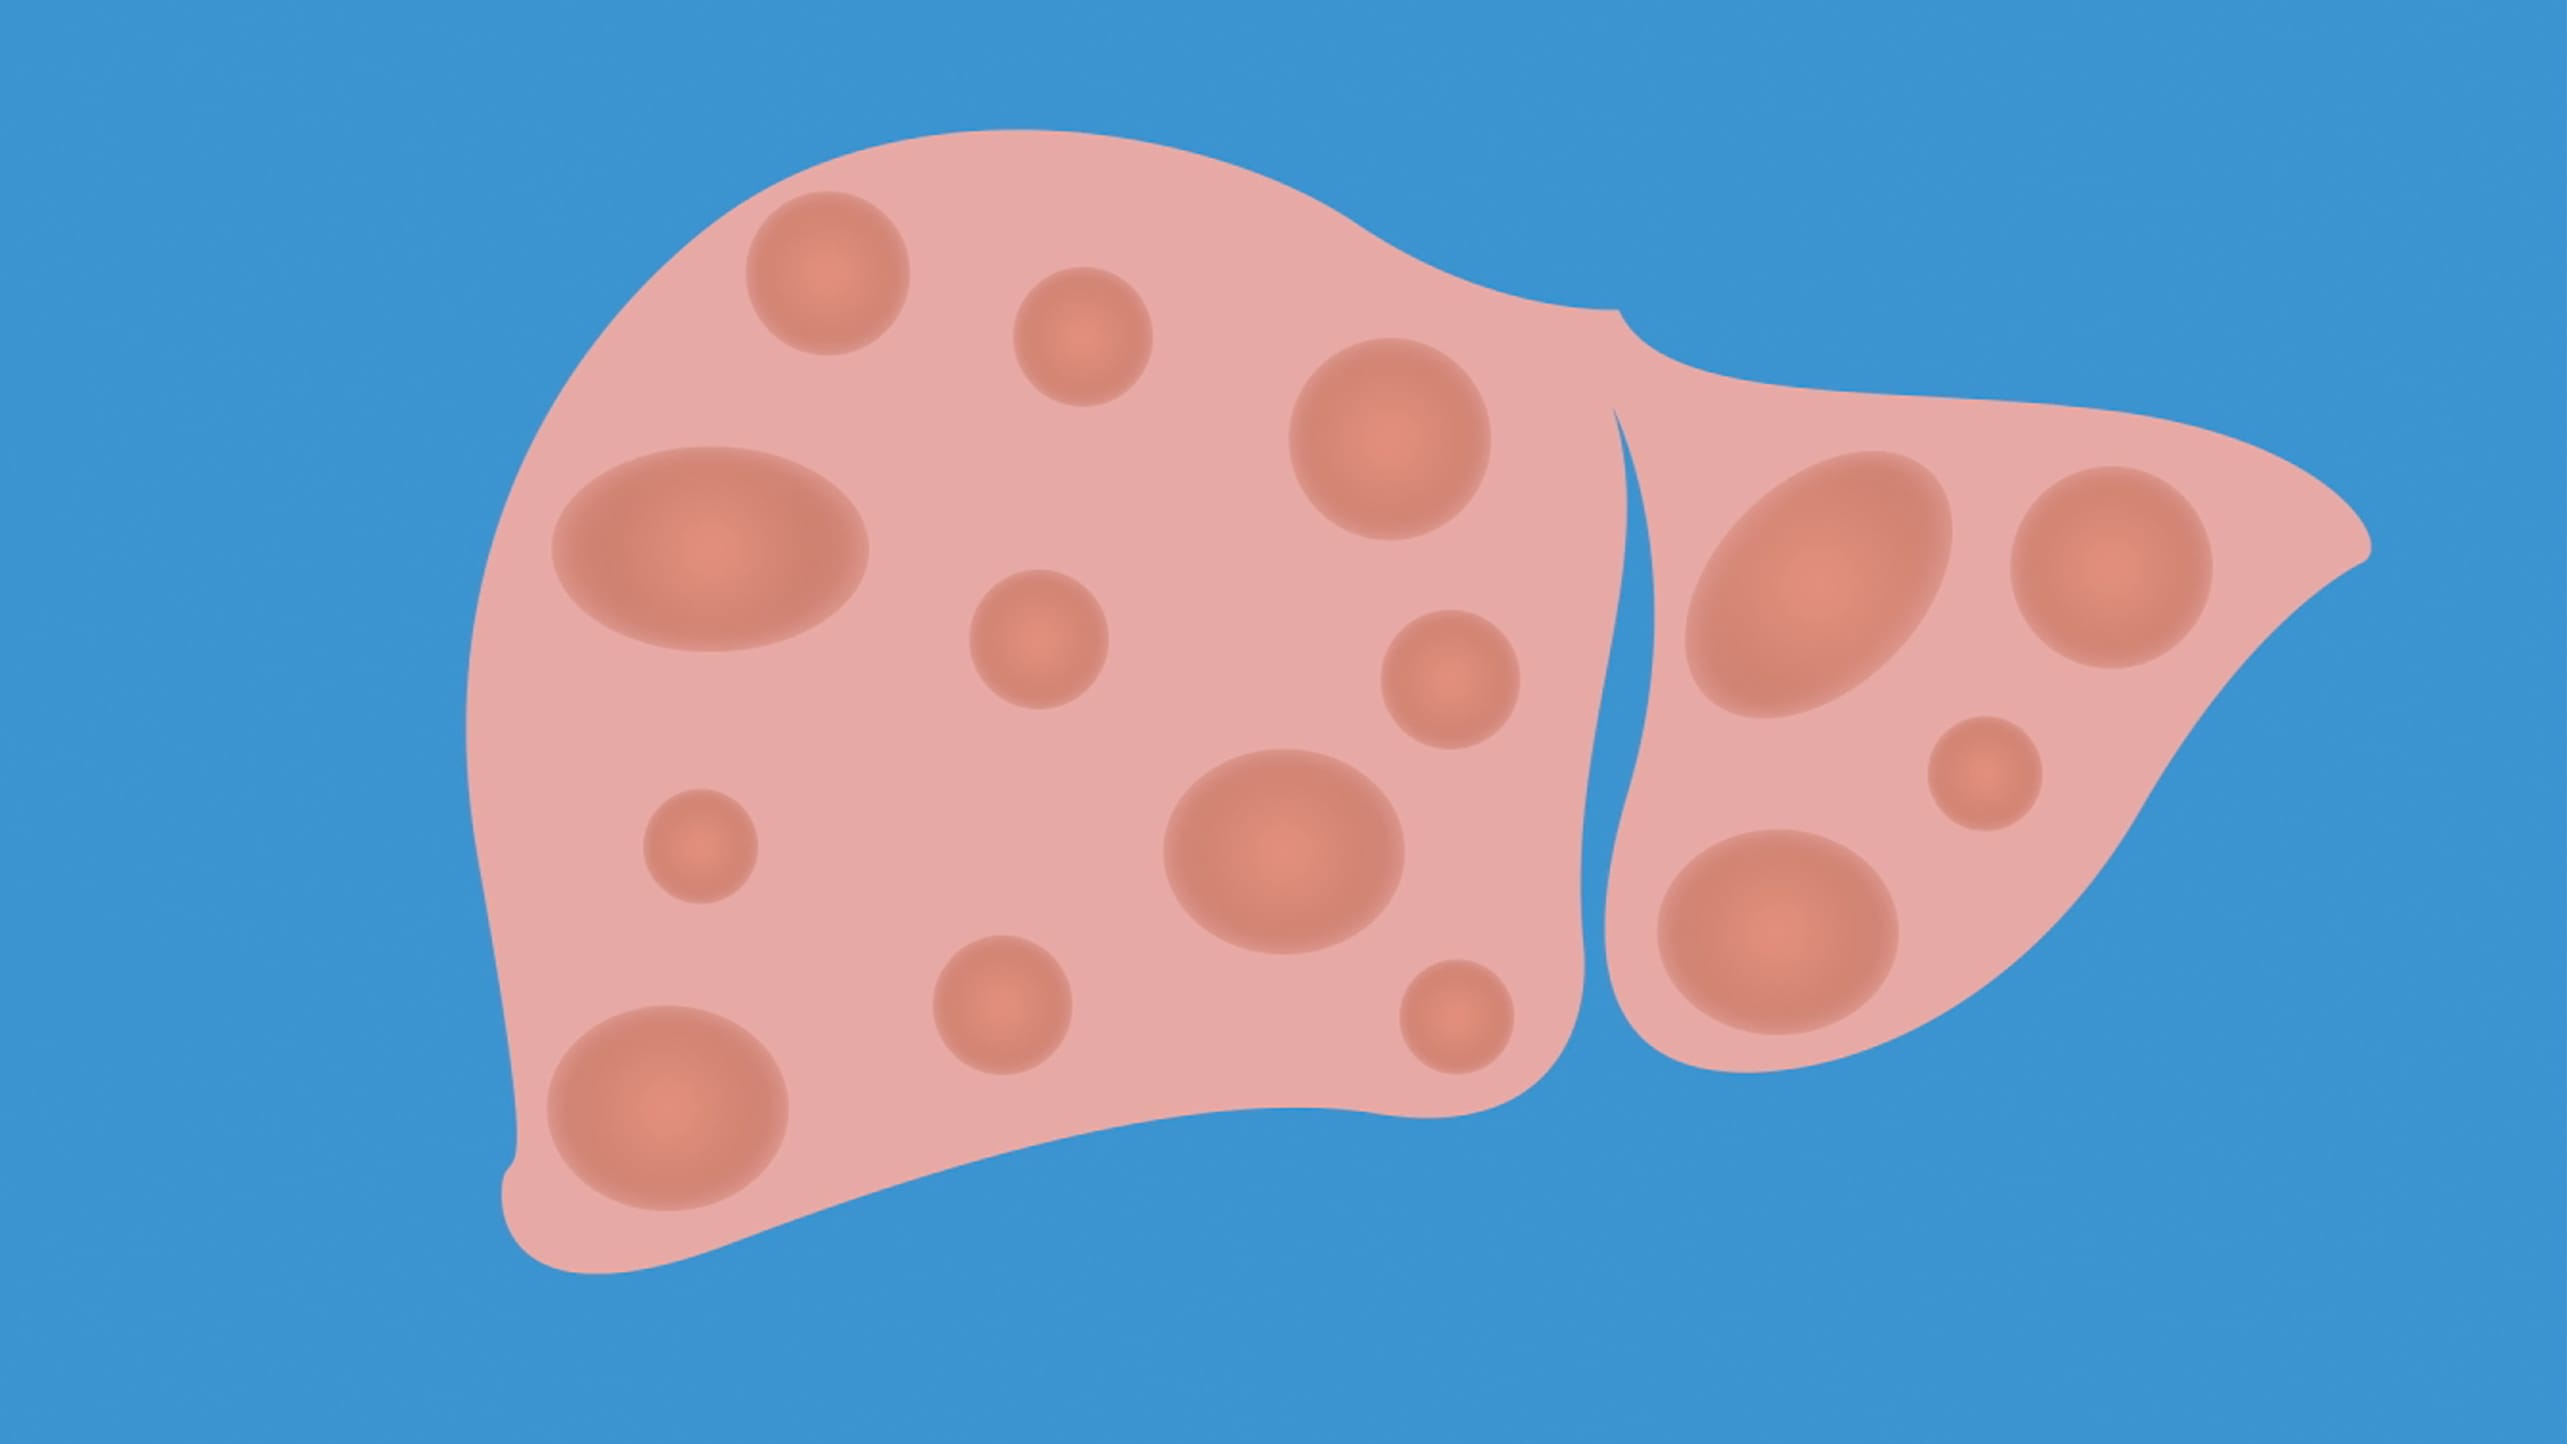 An illustration of a liver with fatty liver disease.